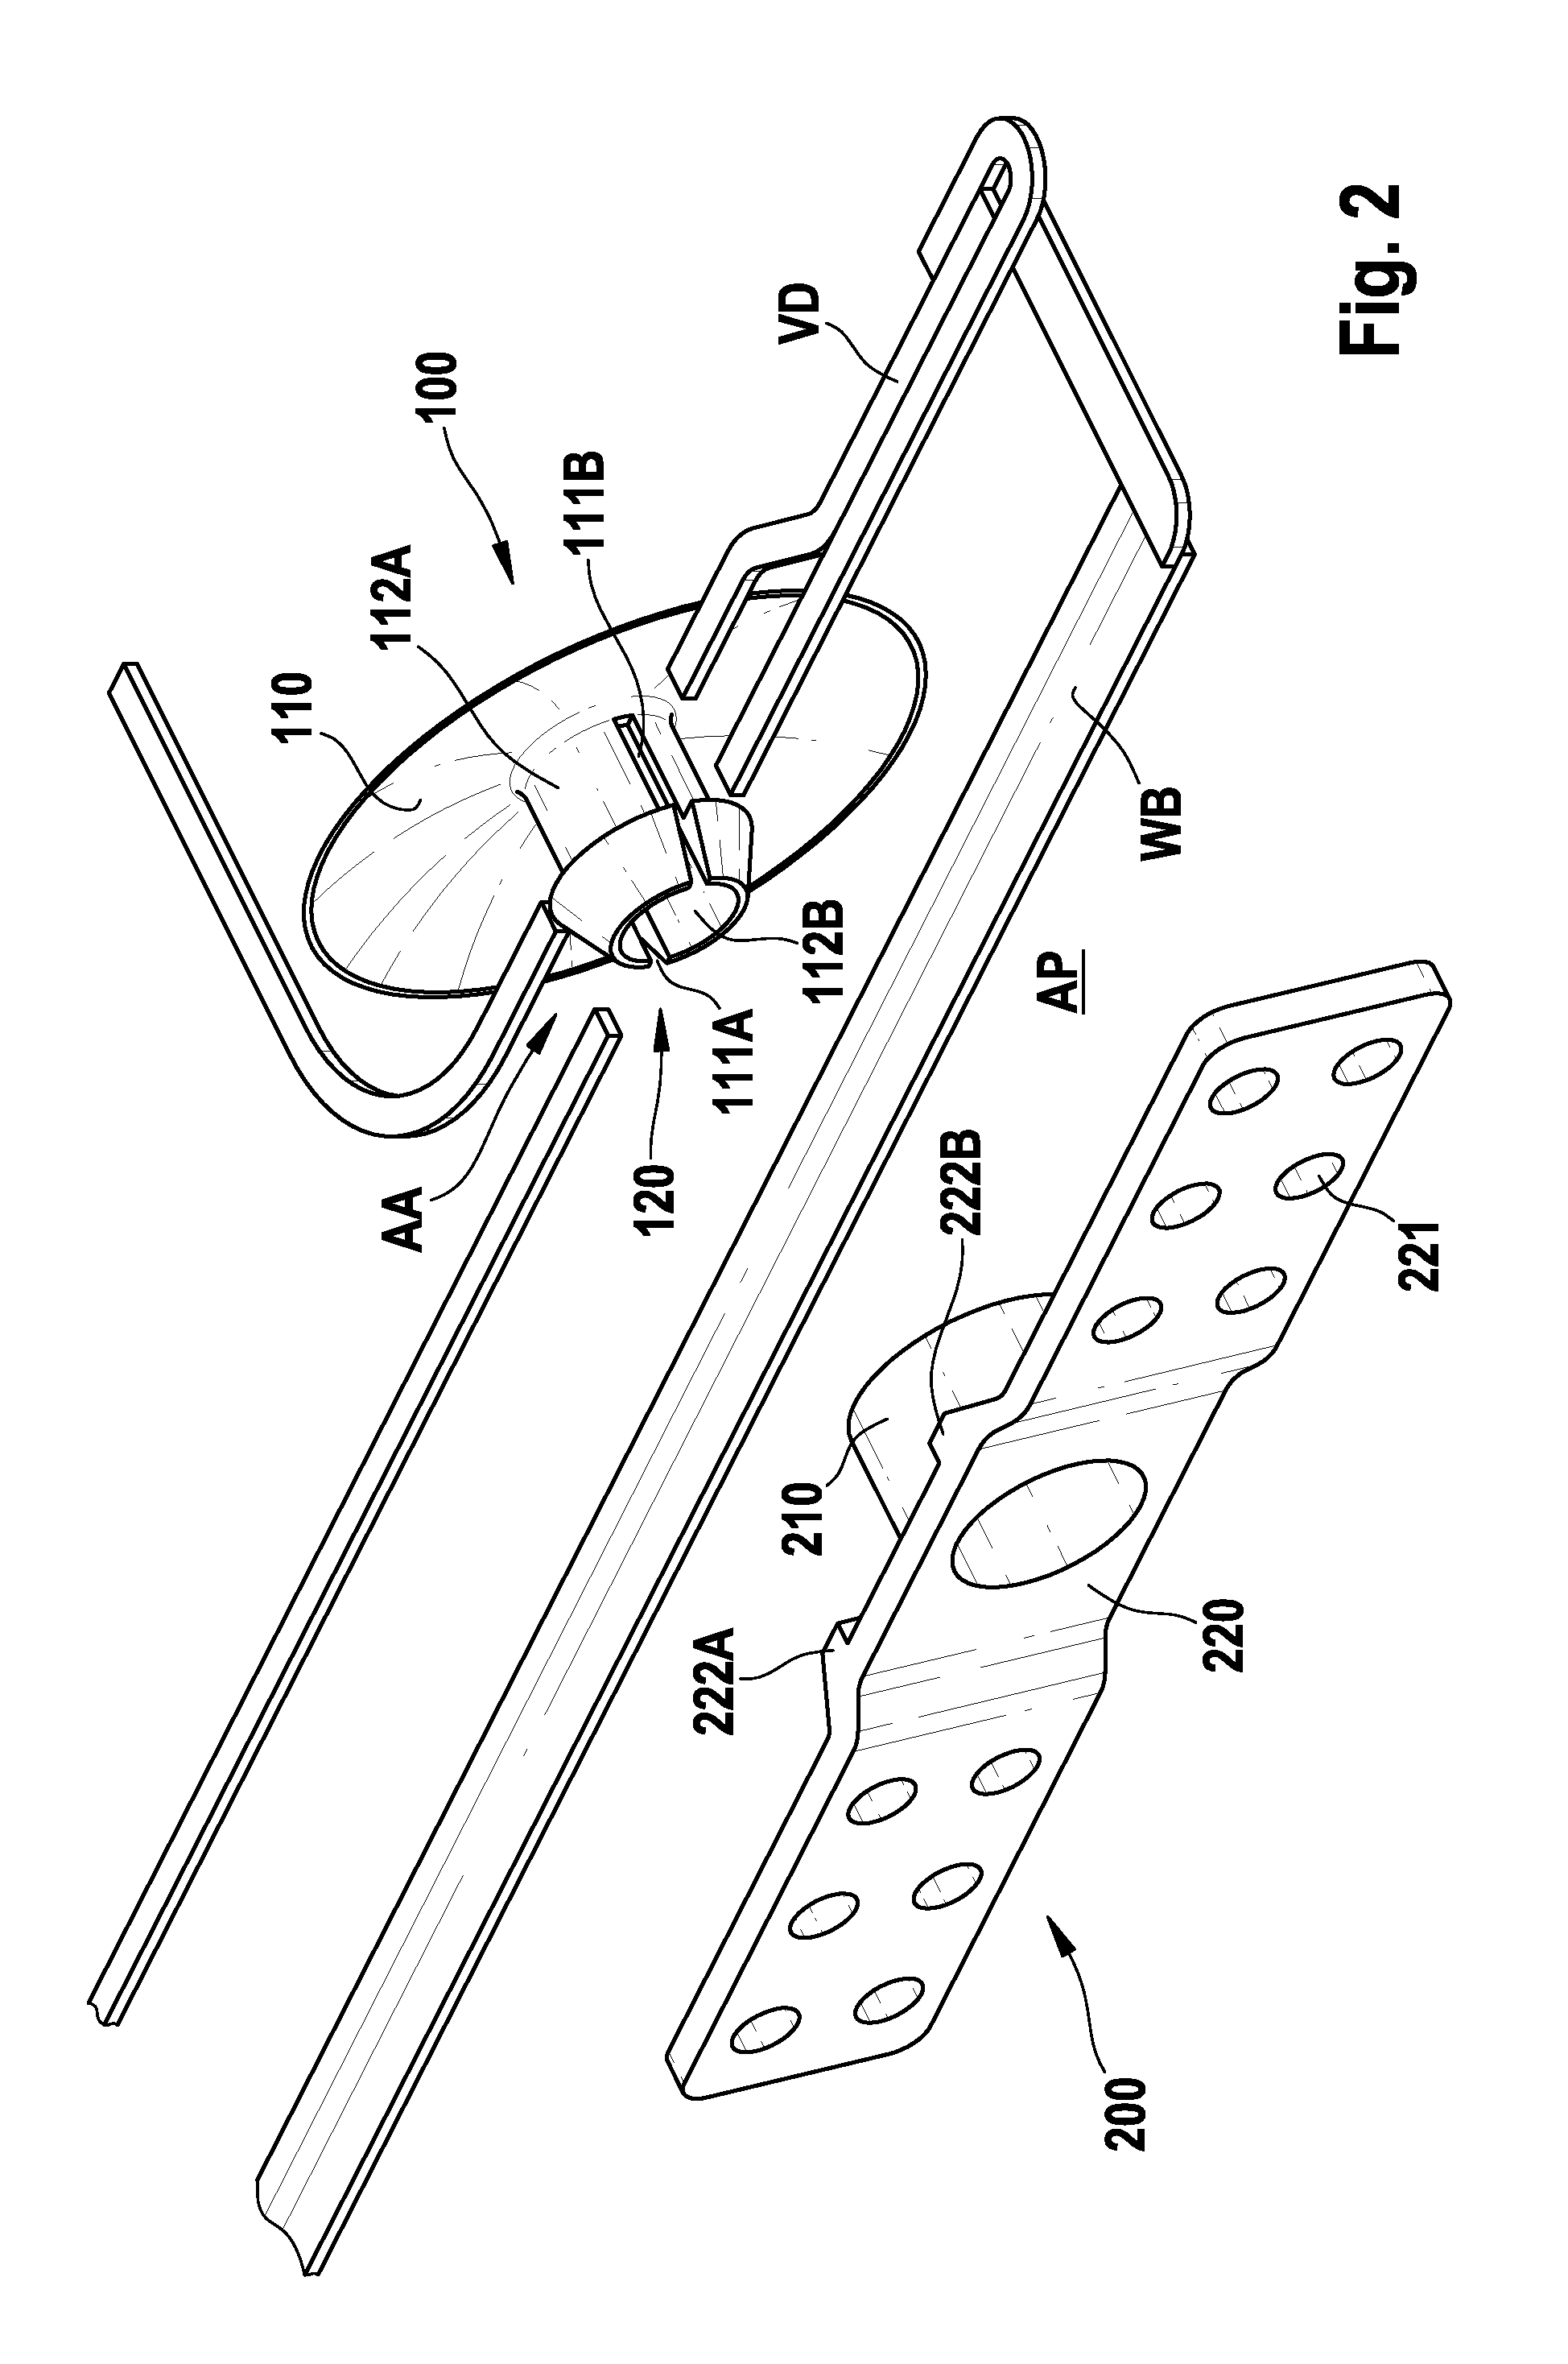 Fastener for components of a motor vehicle